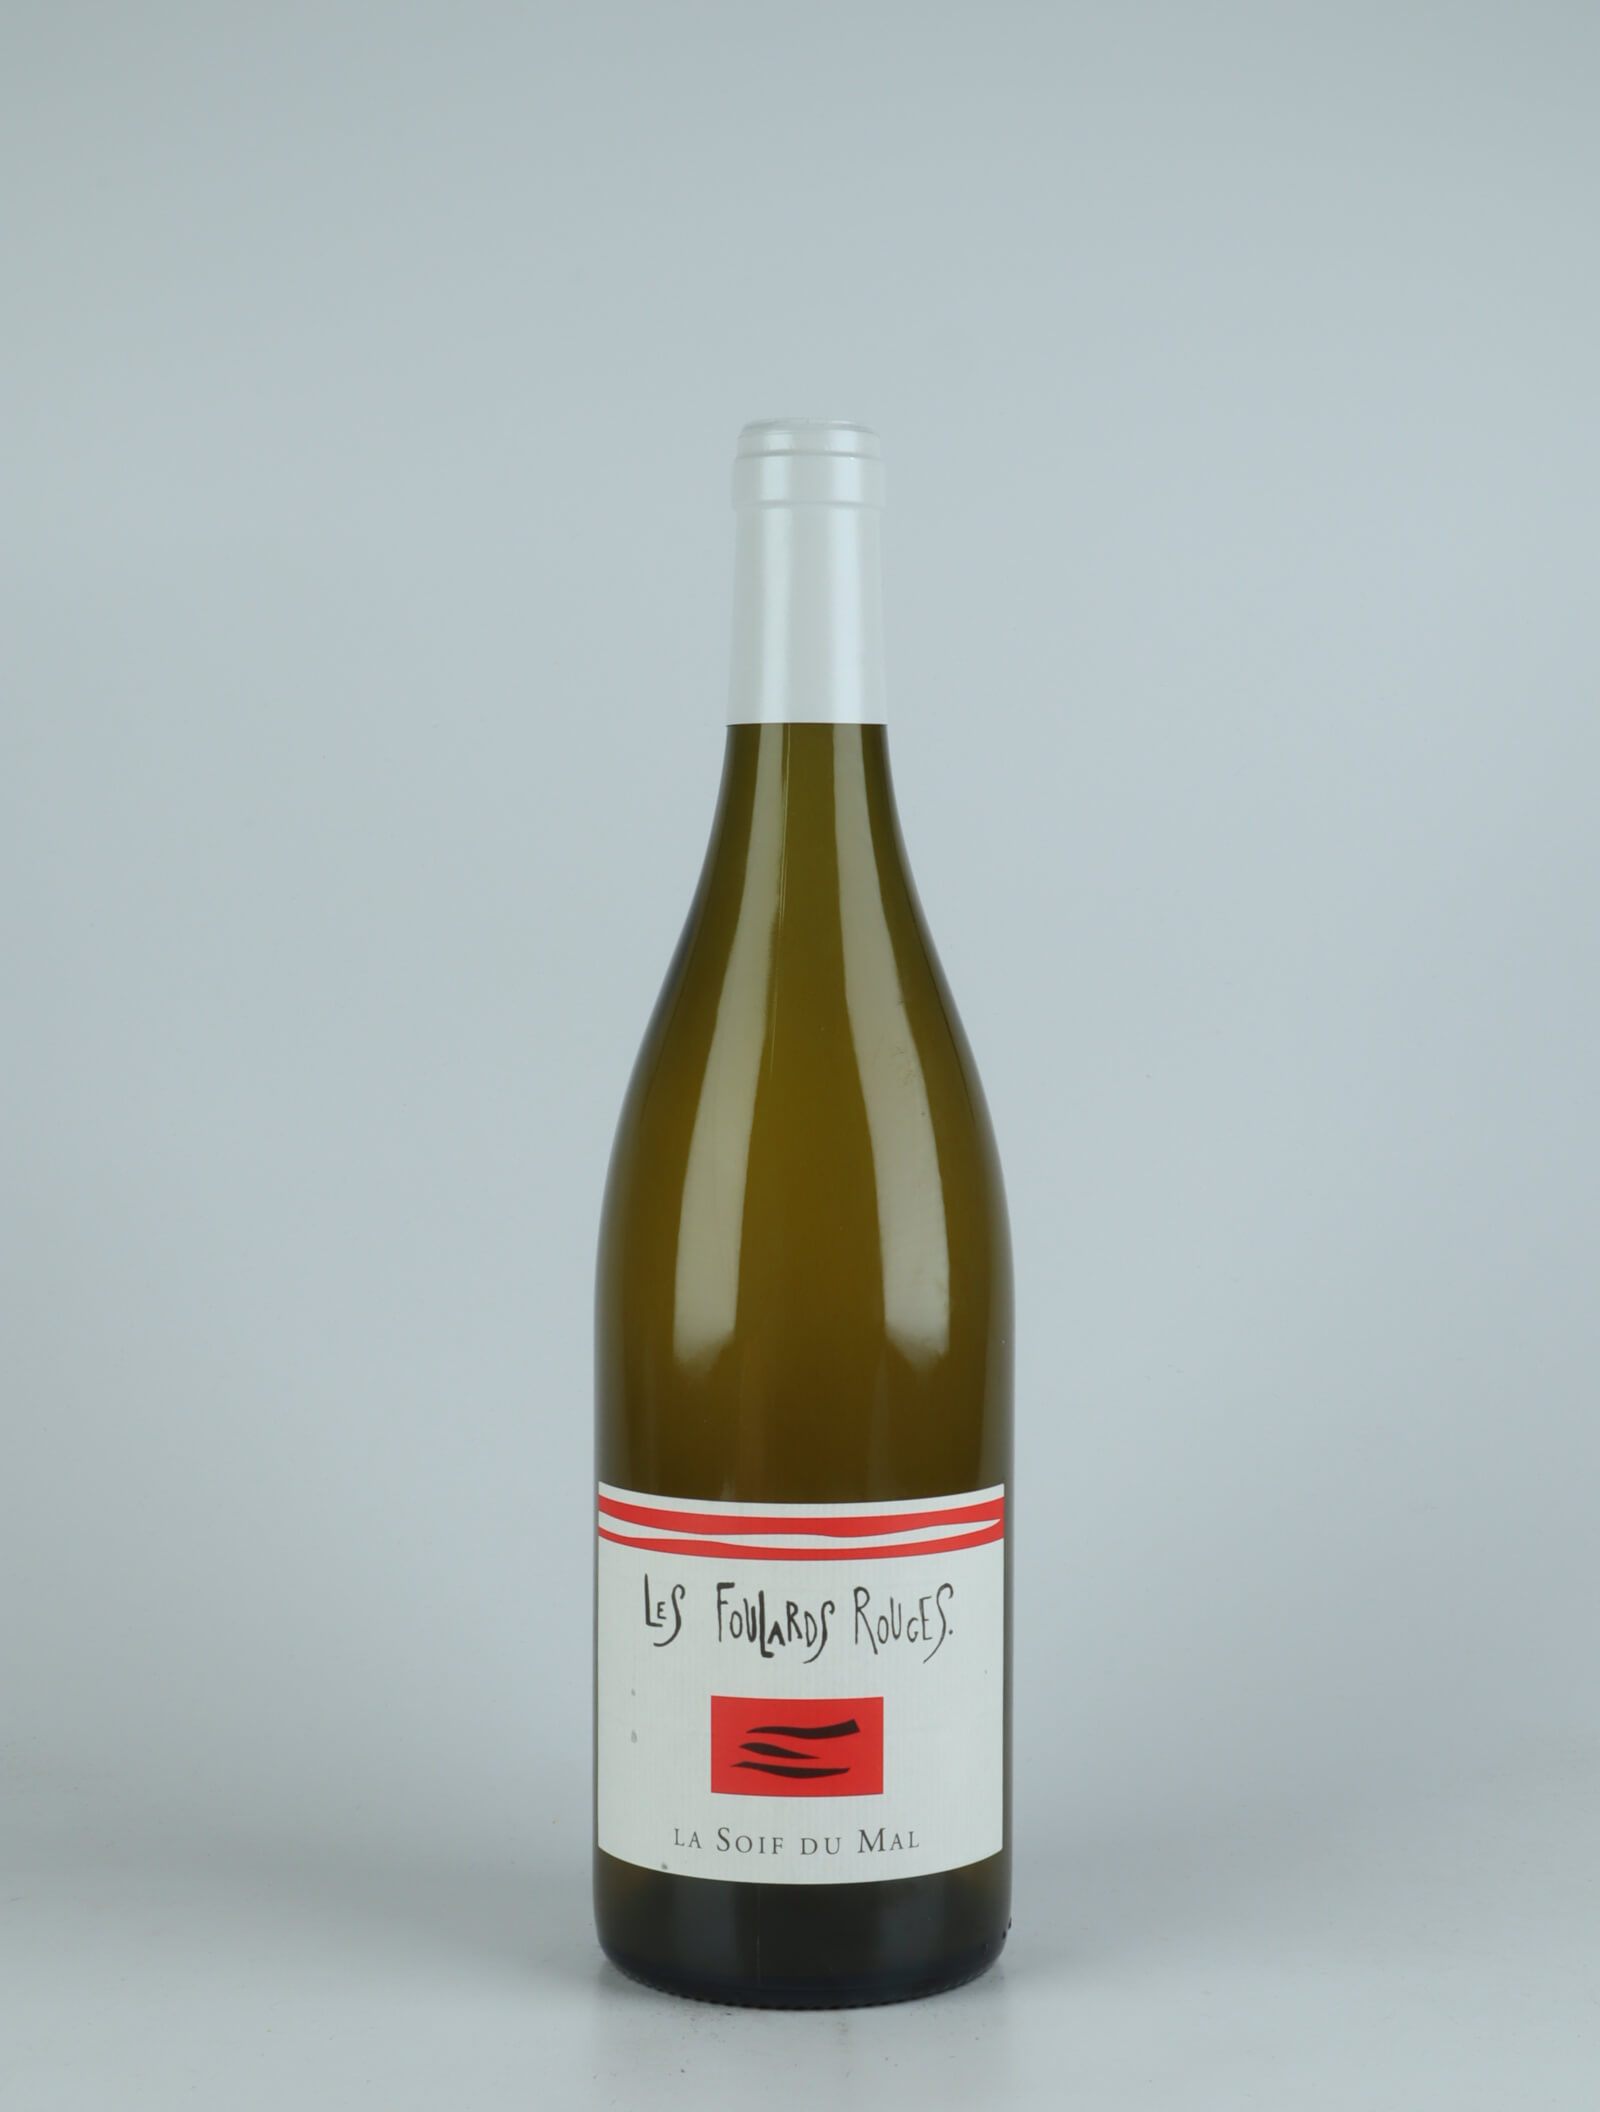 A bottle 2021 Soif du Mal Blanc White wine from Les Foulards Rouges, Languedoc in France